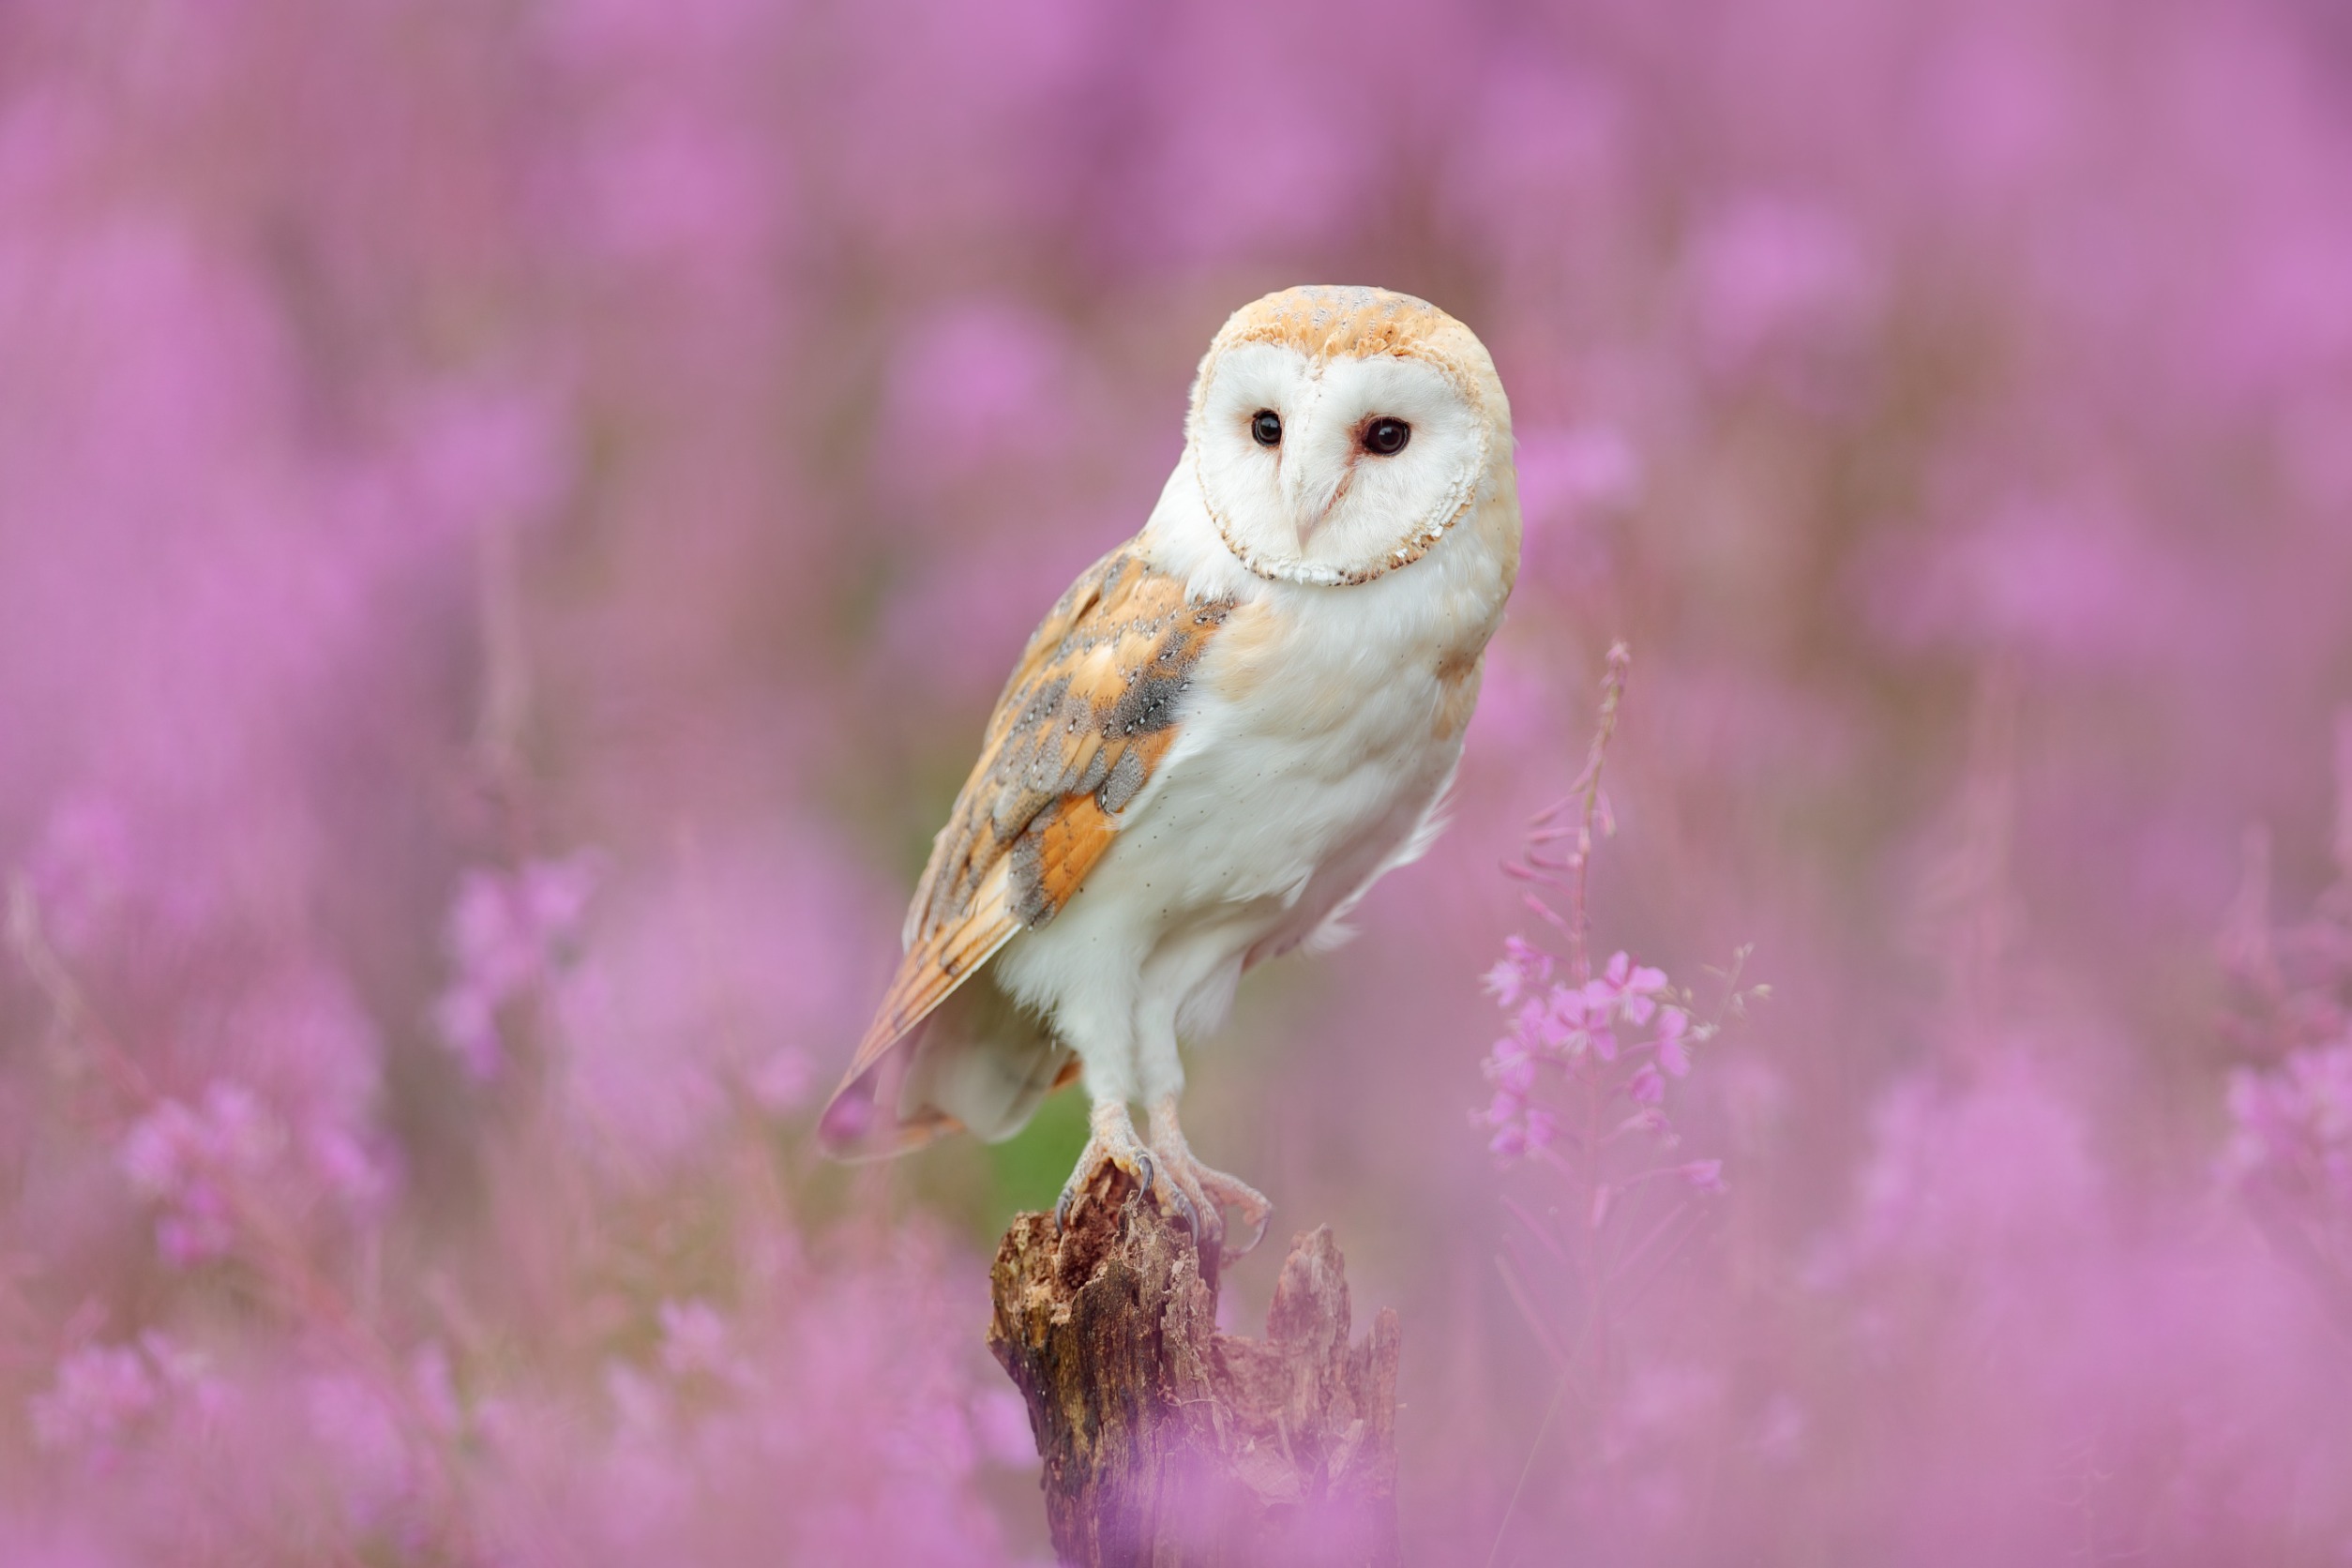 Light brown and white barn owl perched on a stick in a meadow of pink flowers.